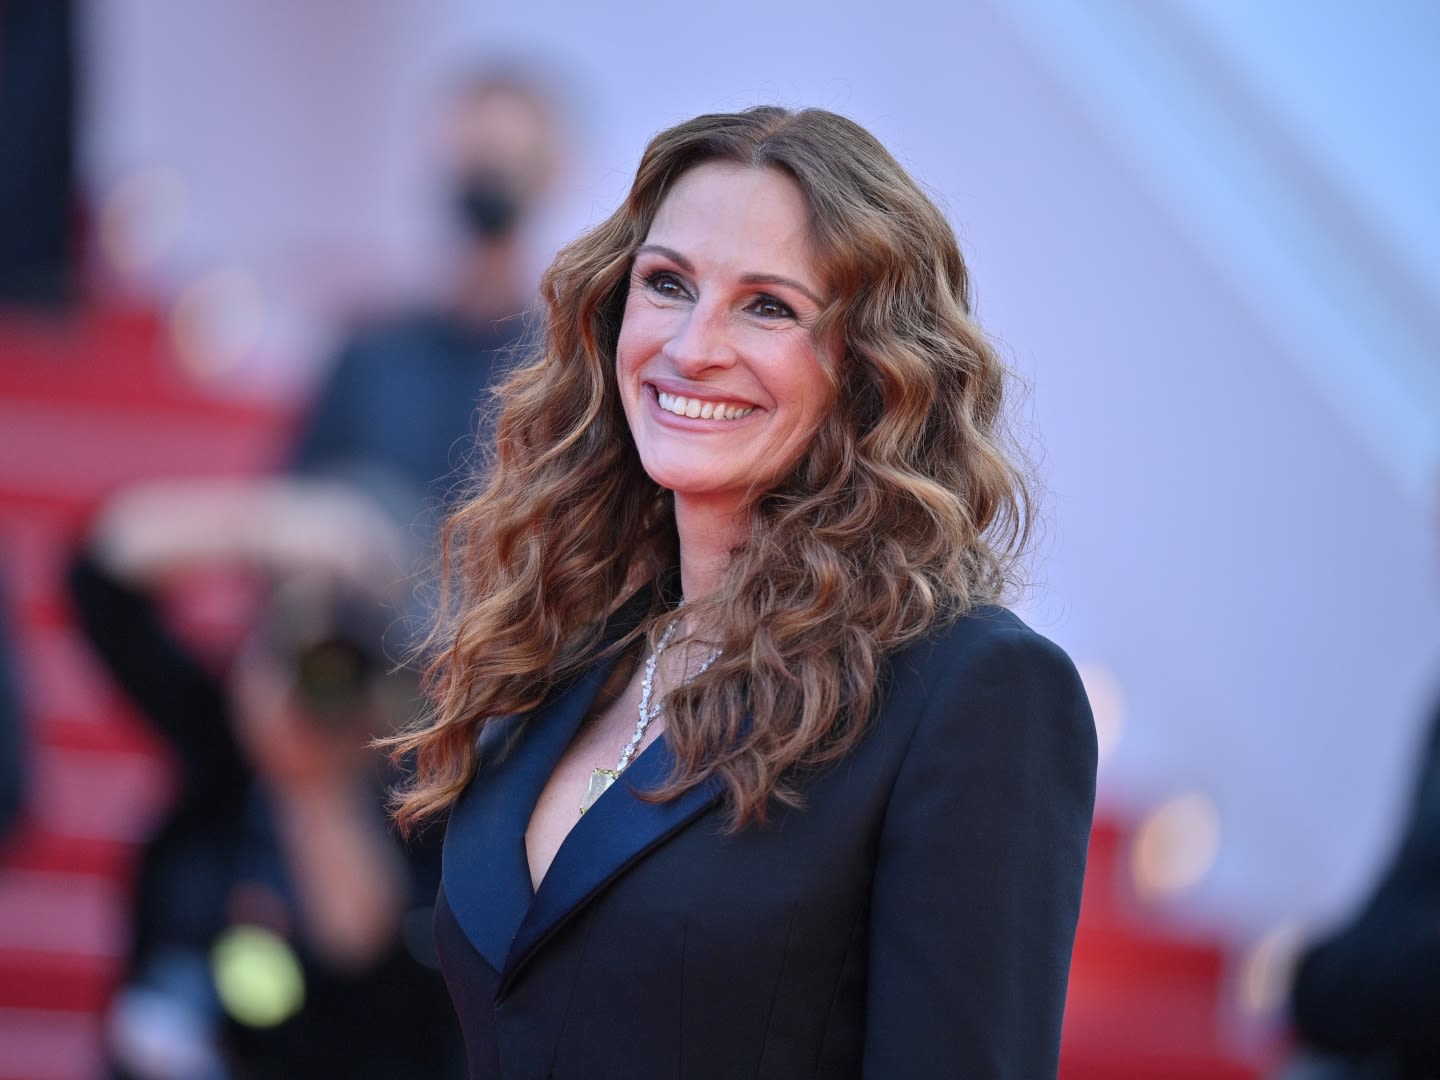 Things to Know About Julia Roberts' Life Outside the Spotlight